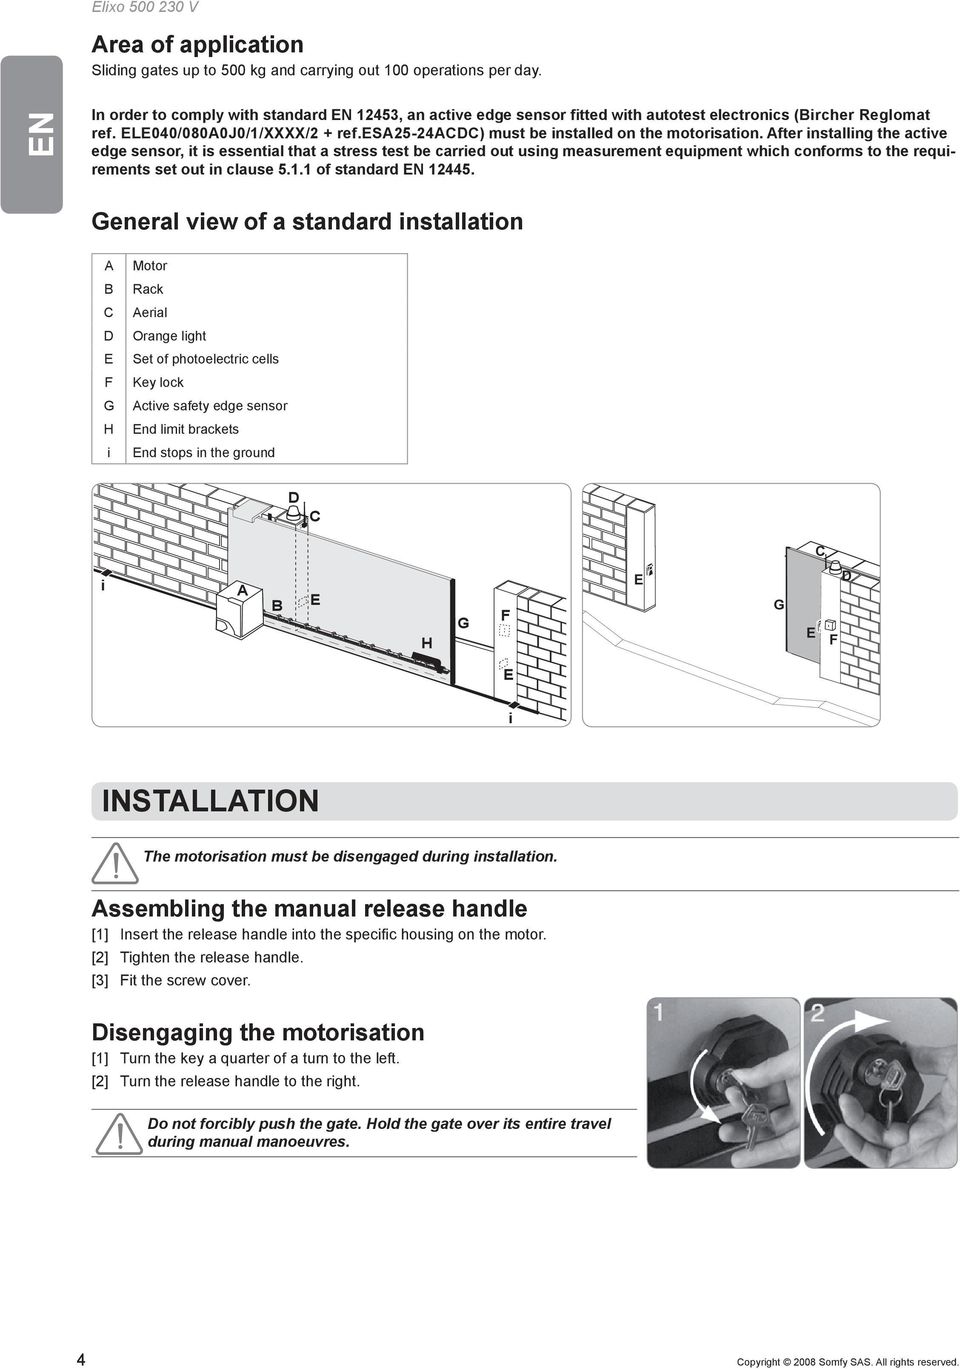 es25-24cdc) must be installed on the motorisation.